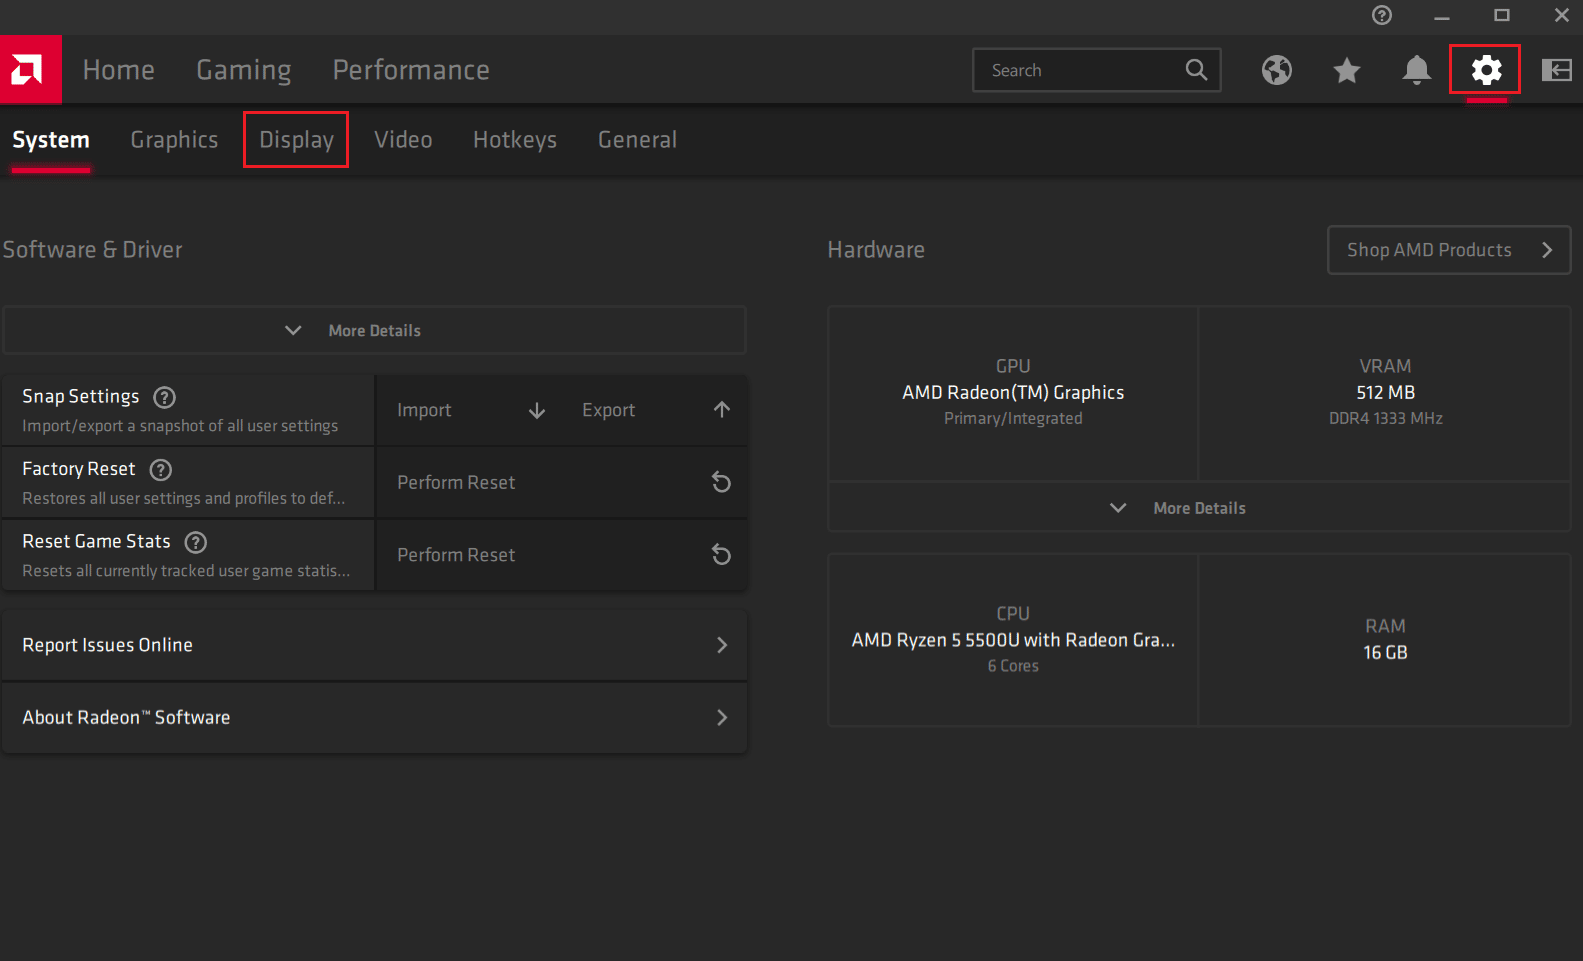 Click on the Settings gear icon - Display tab